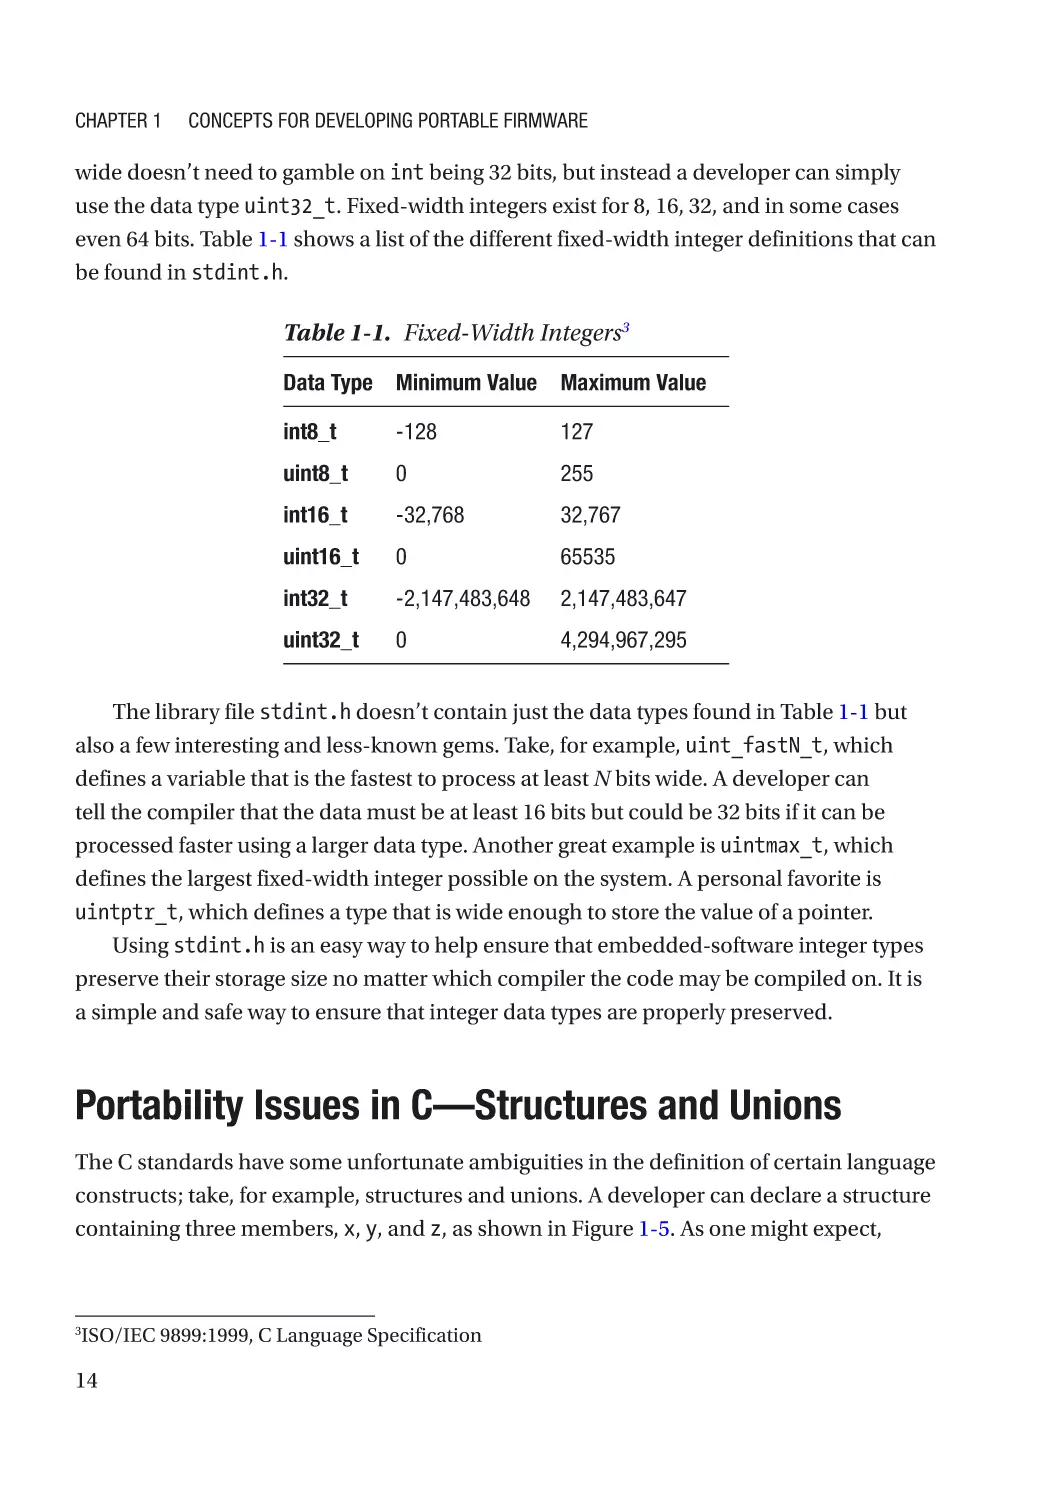 Portability Issues in C—Structures and Unions